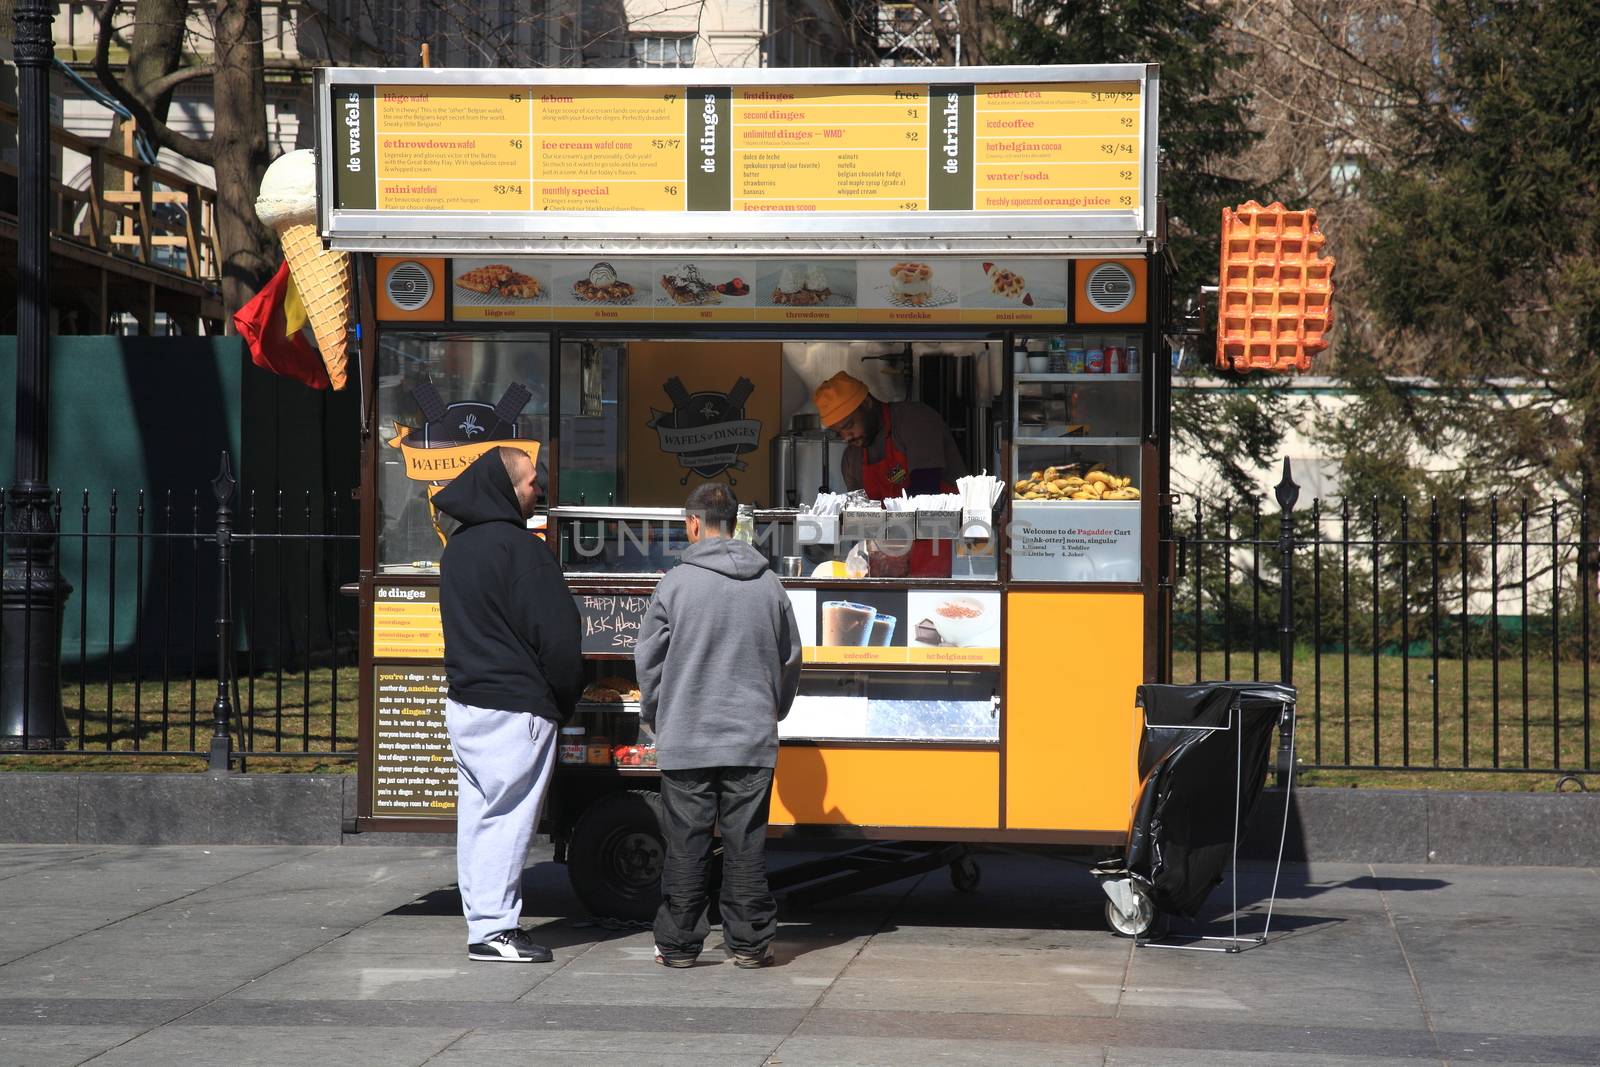 New York Street Vendor by Ffooter